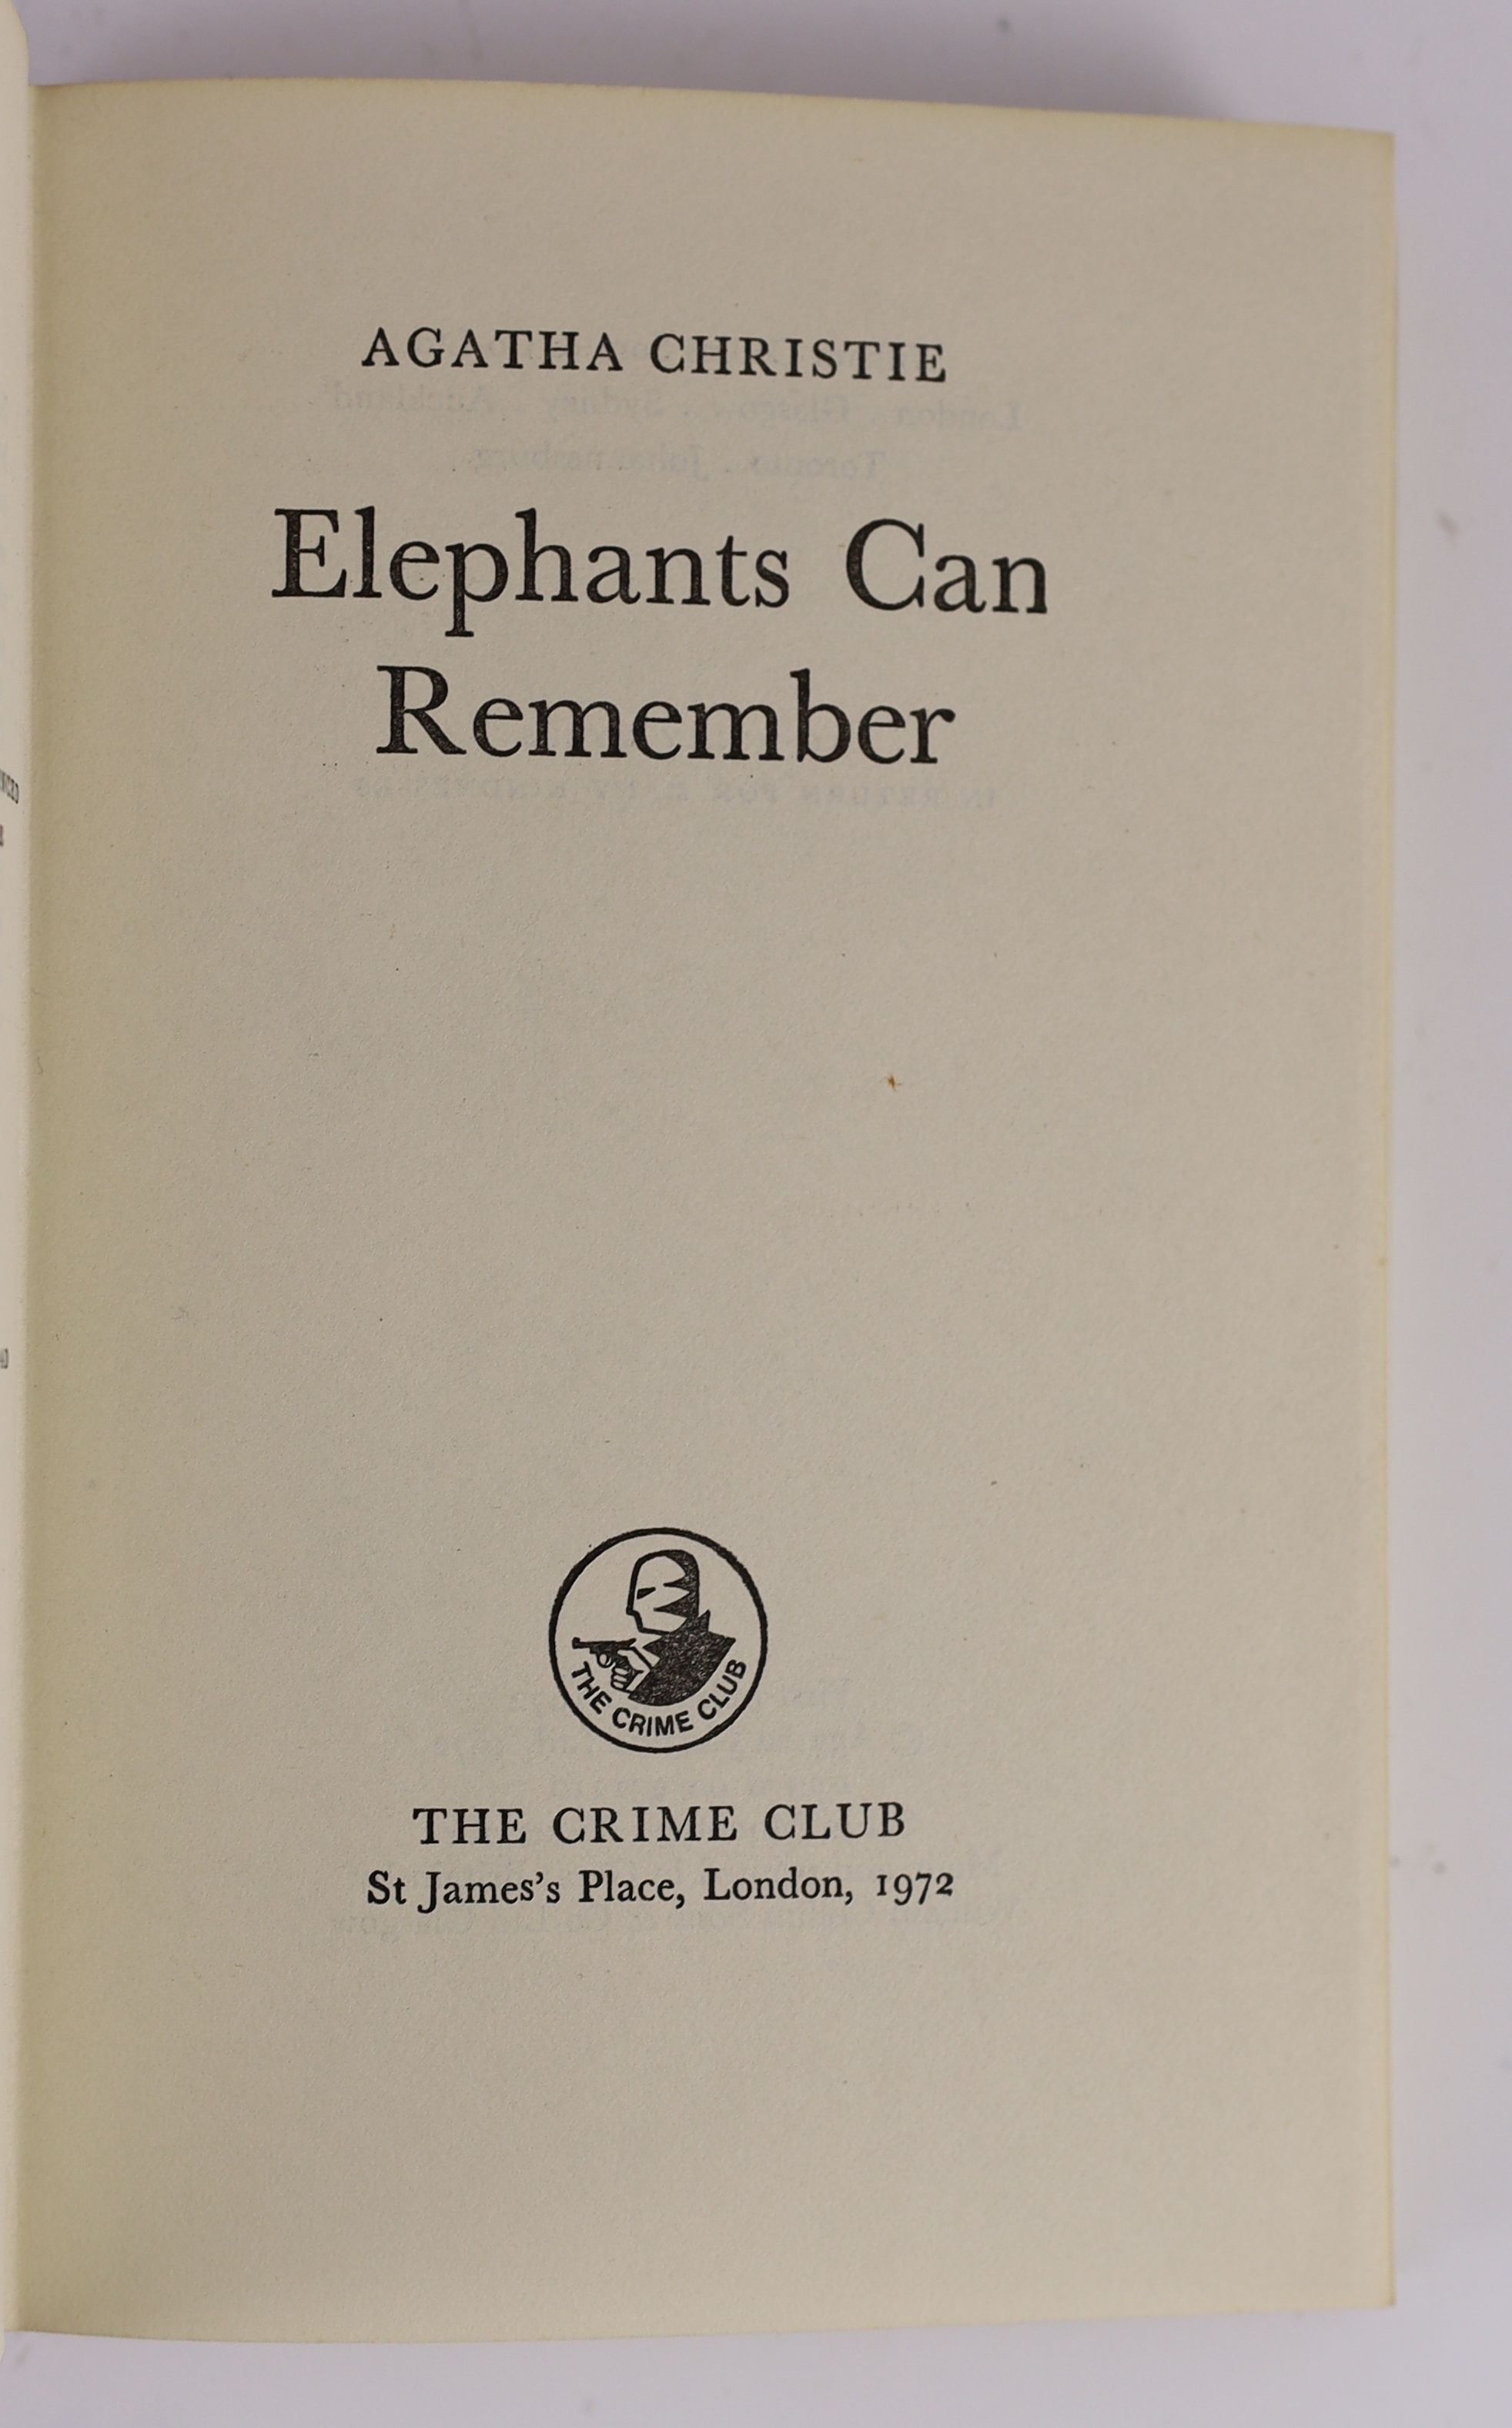 Christie, Agatha - Two works - Elephants Can Remember, 1st edition